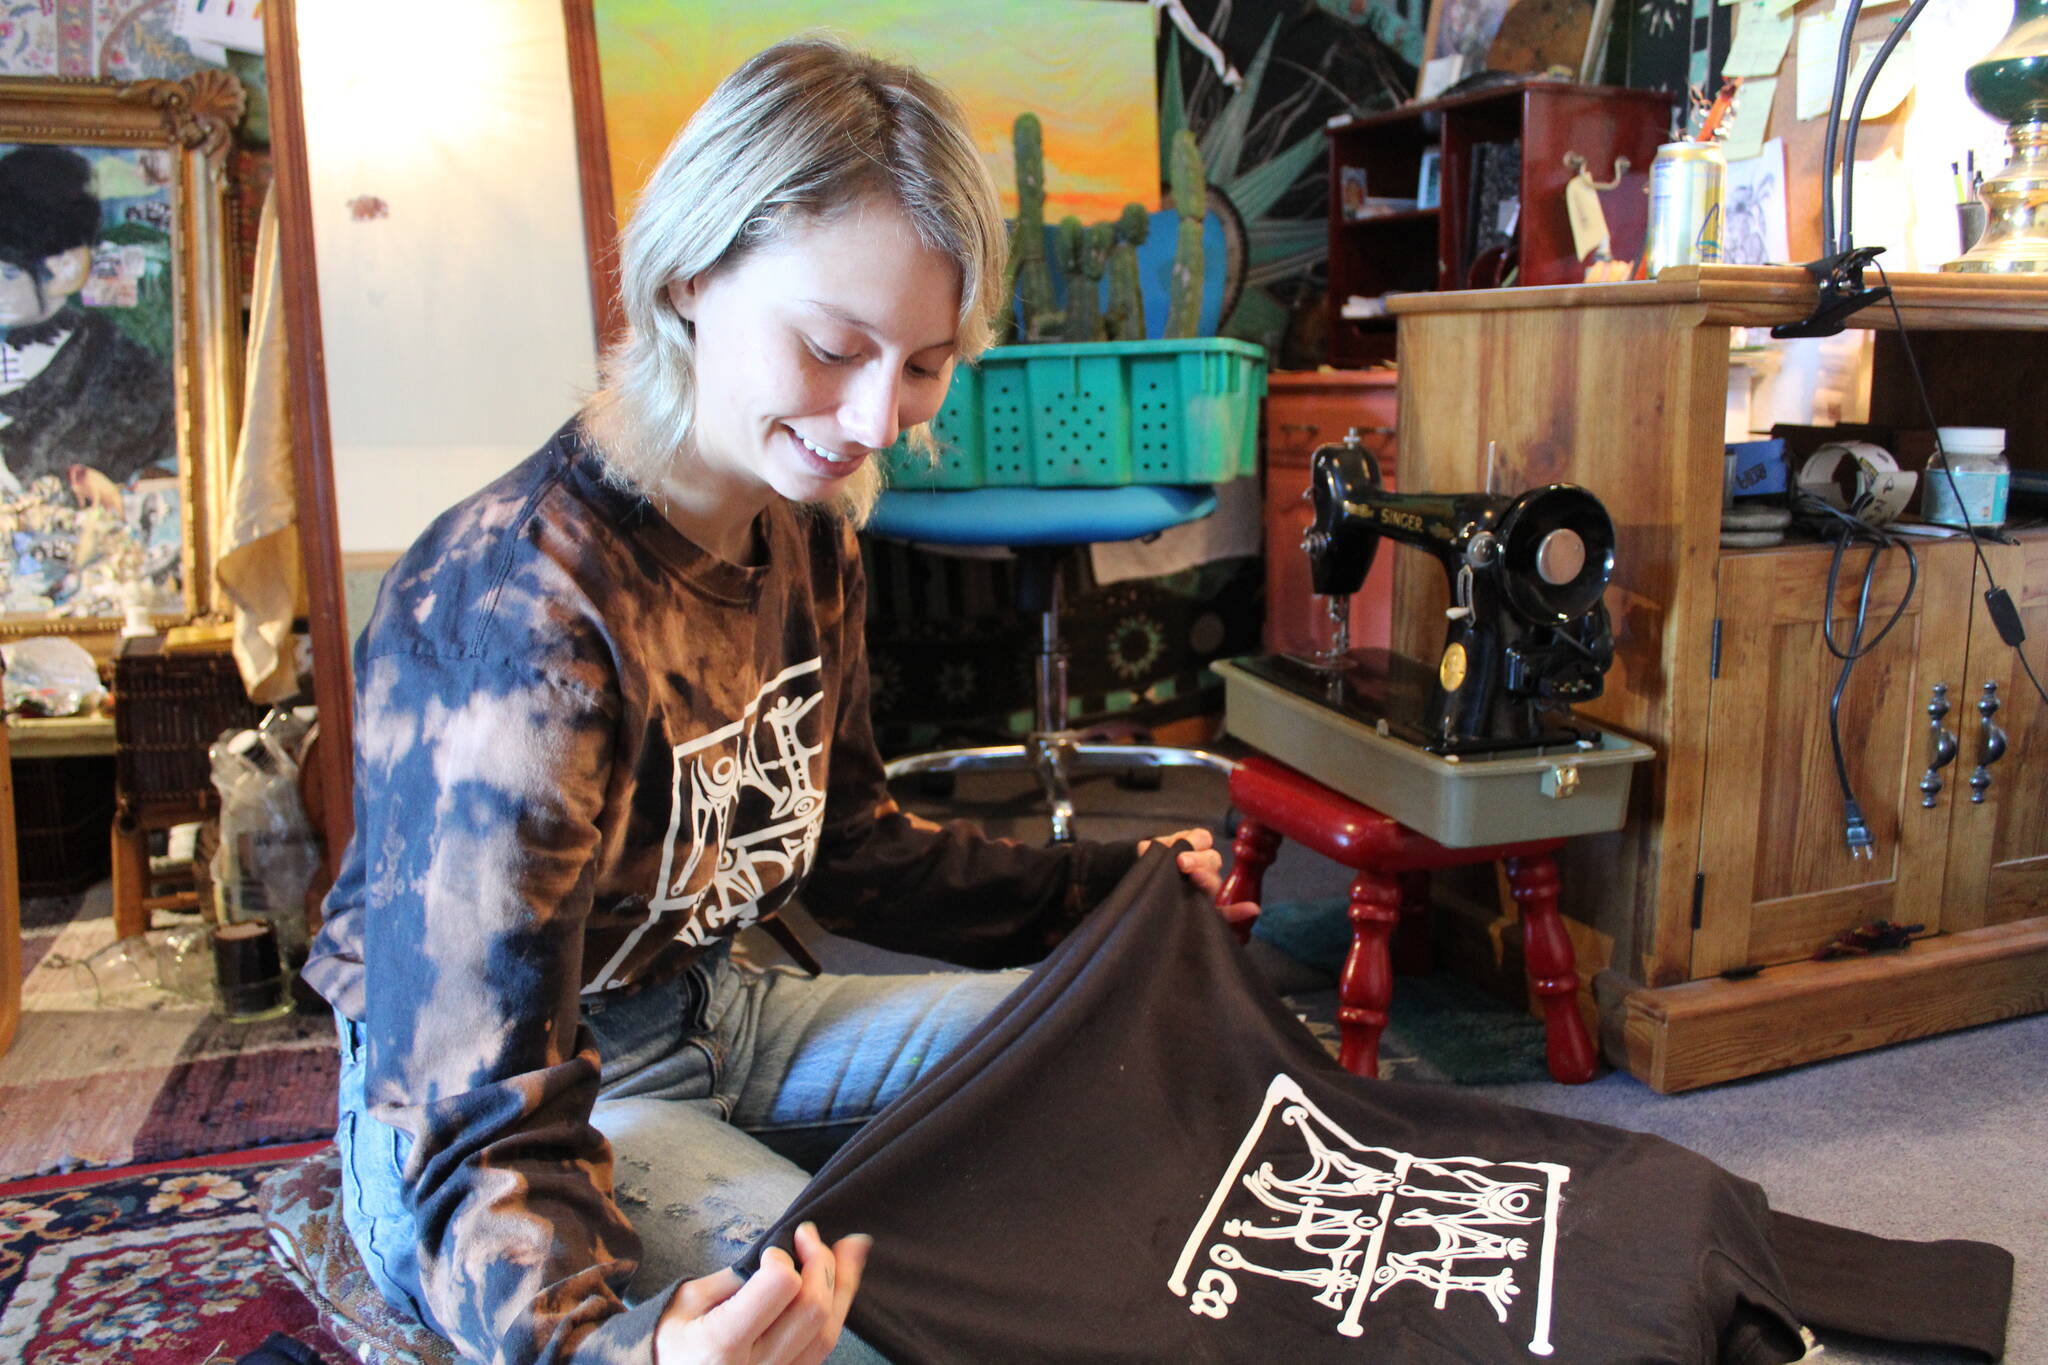 Photo by Karina Andrew/Whidbey News-Times
Nora Boehm folds and ties T-shirts in a style inspired by the Japanese Shibori style of dyeing clothes. It is one of several ways in which Boehm upcycles clothing. One purpose of her art is to promote a sustainable lifestyle and cut off cycles of consumerism that rely on unethical production methods by encouraging people to upcycle and reuse clothing instead of throwing it away.